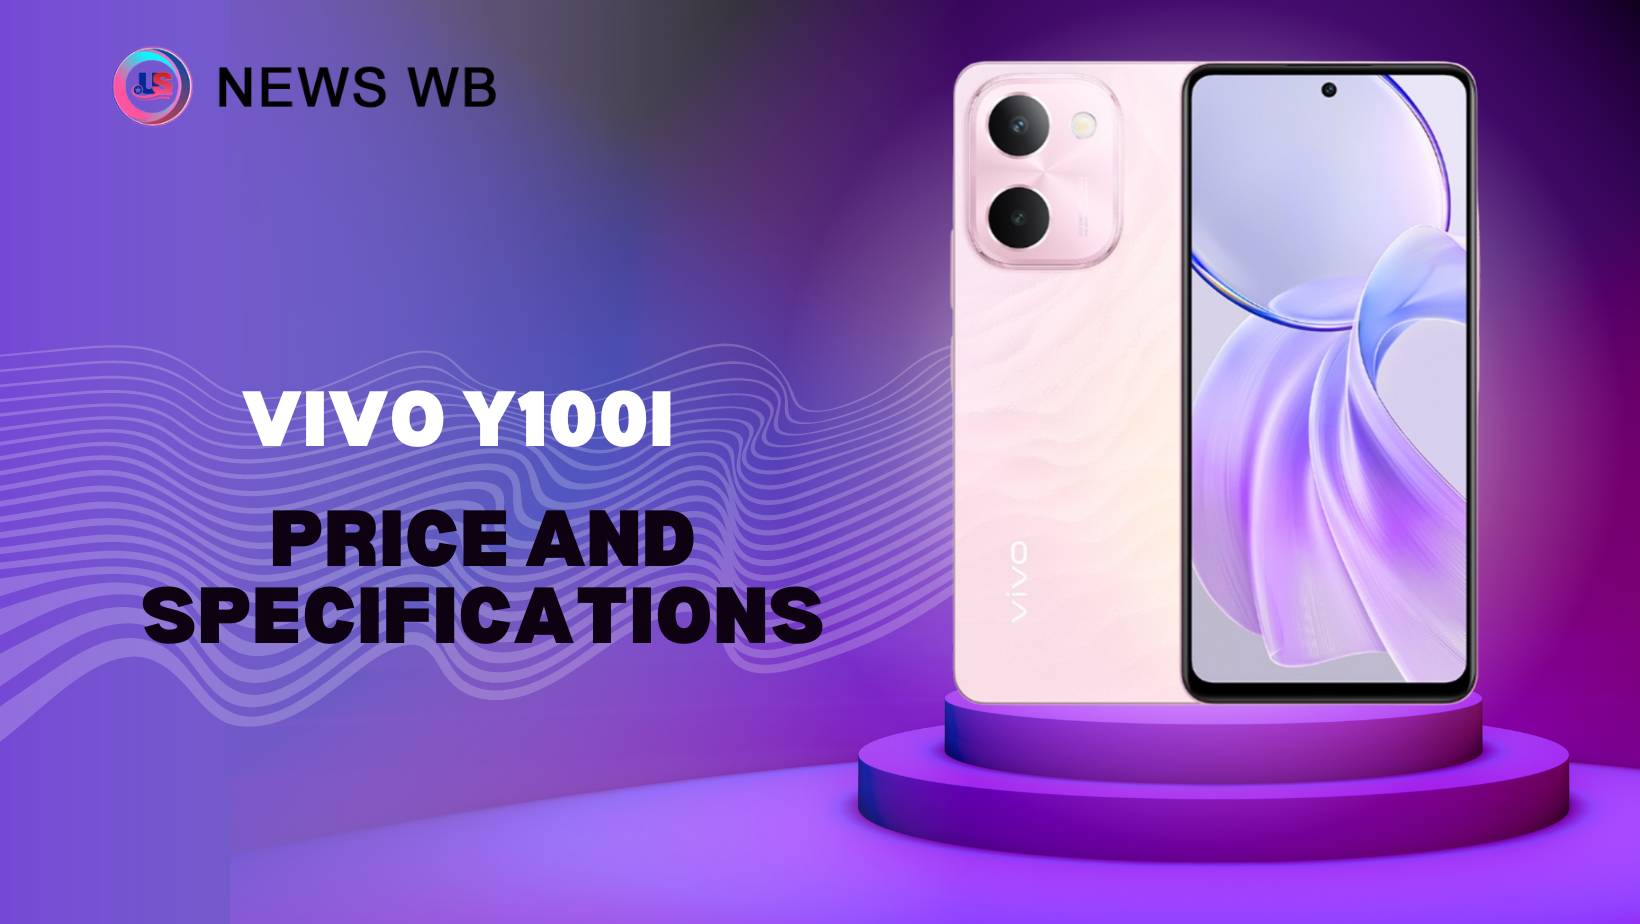 Vivo Y100i Price and Specifications